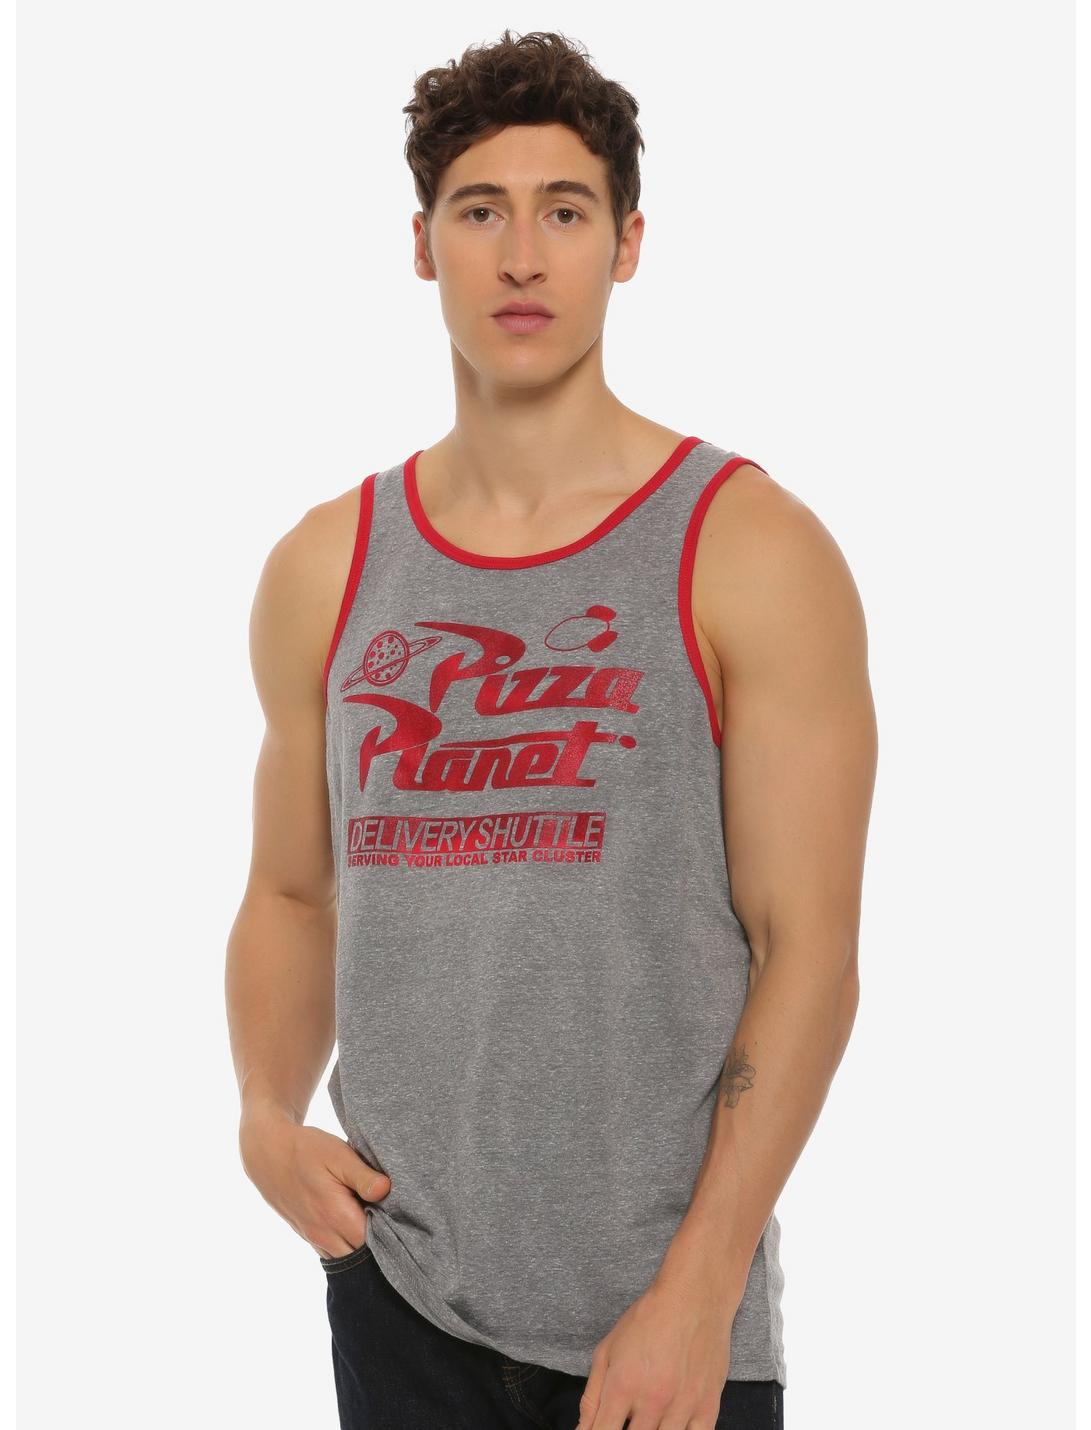 Disney Pixar Toy Story Pizza Planet Ringer Tank Top - BoxLunch Exclusive, GREY, hi-res